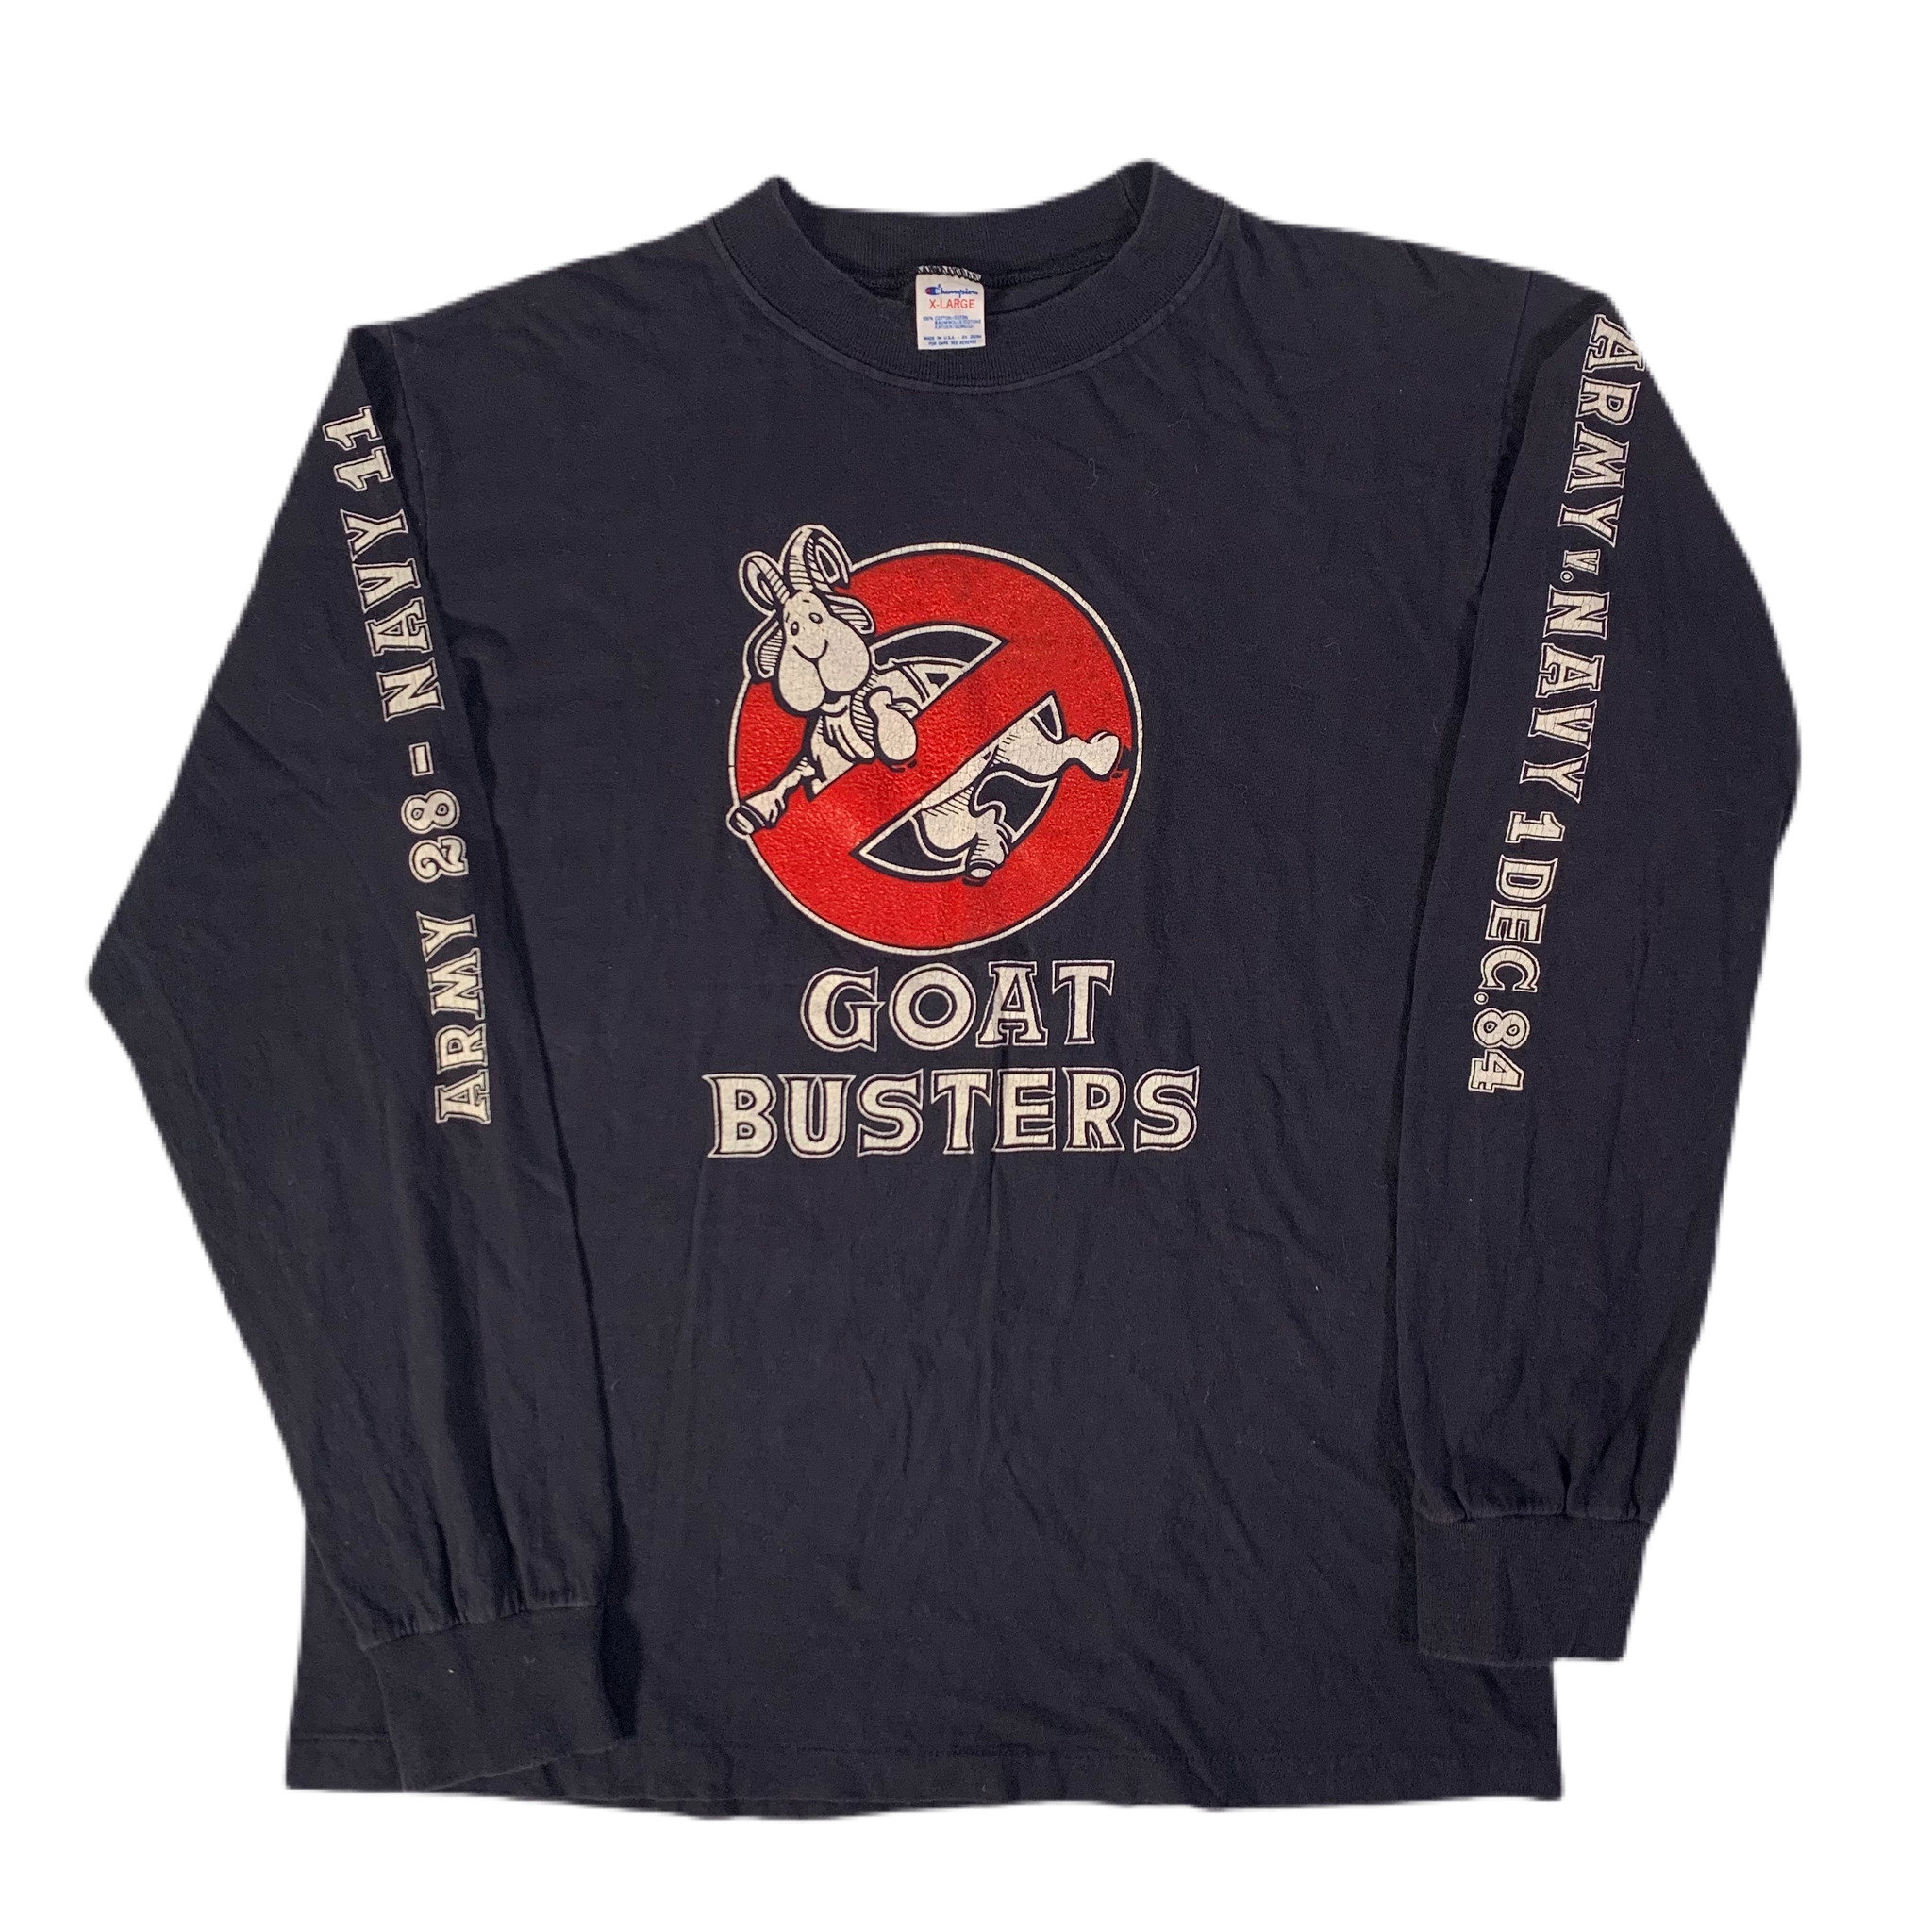 Champion Army Navy "Goat Busters" Sleeve Shirt | jointcustodydc